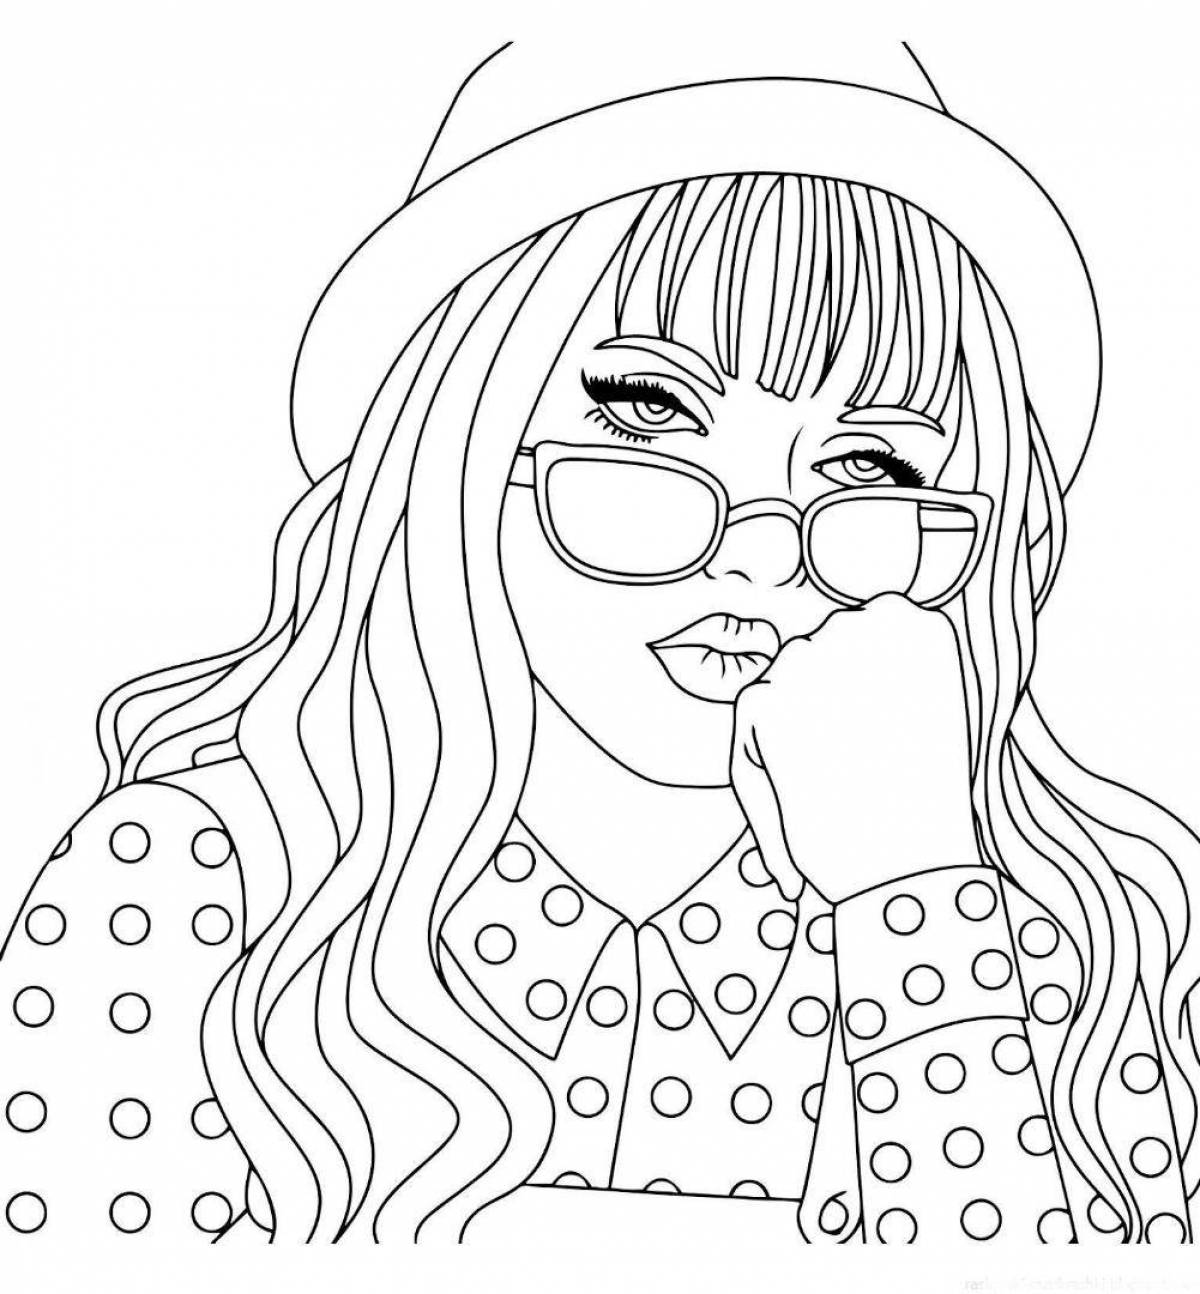 Adorable coloring book for girls 16-17 years old